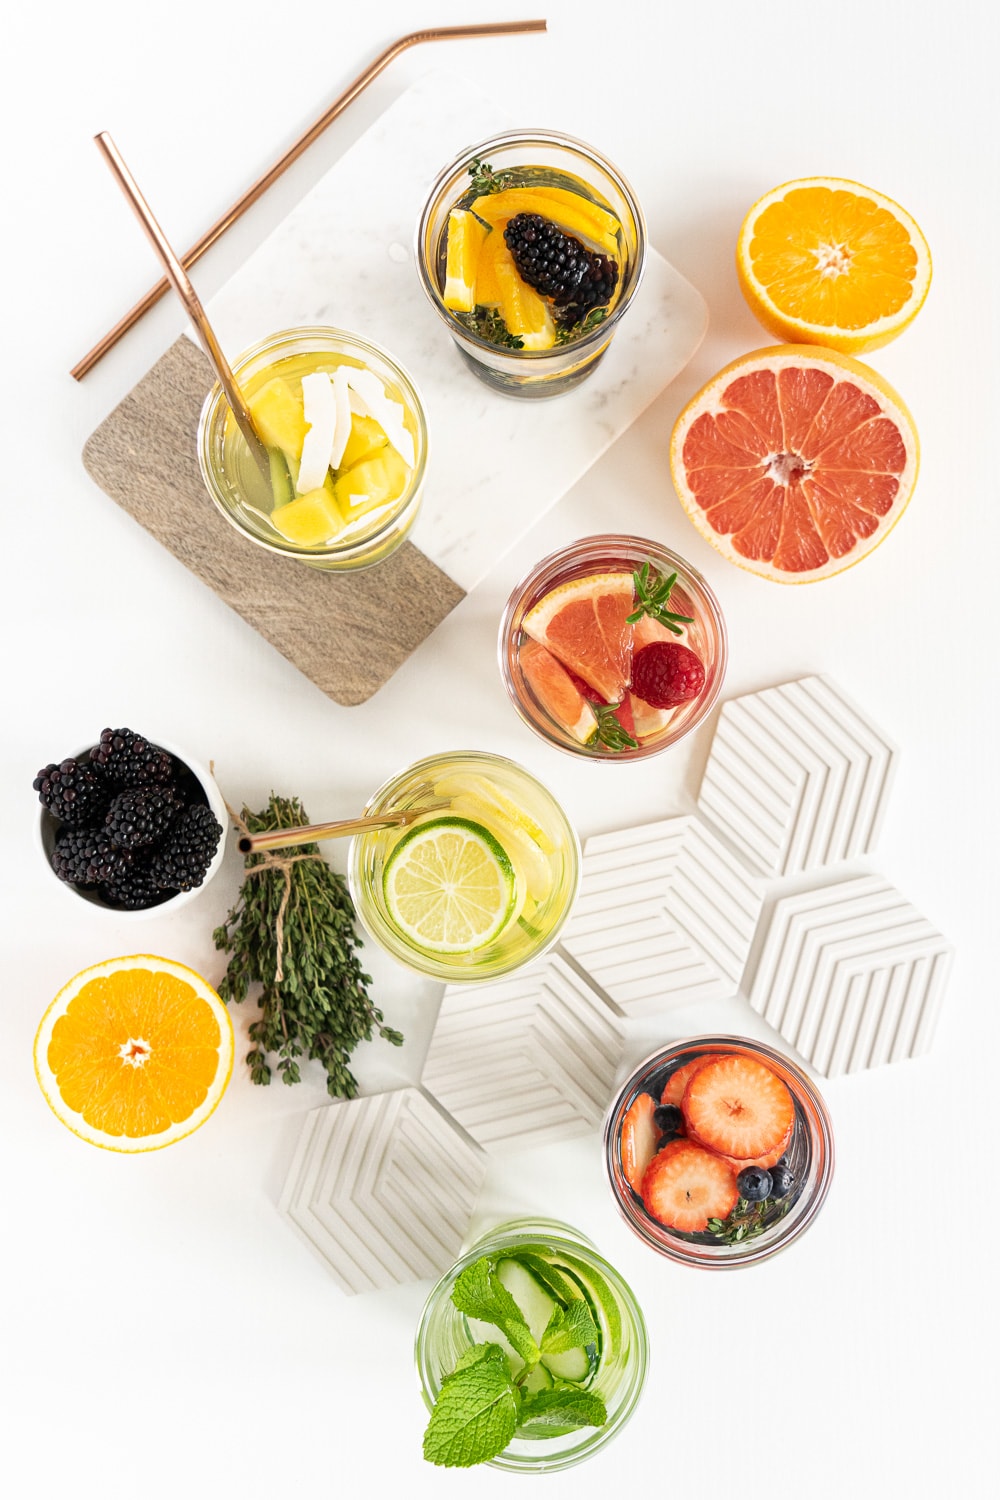 https://gatheringdreams.com/wp-content/uploads/2020/06/infused-water-recipes-16.jpg